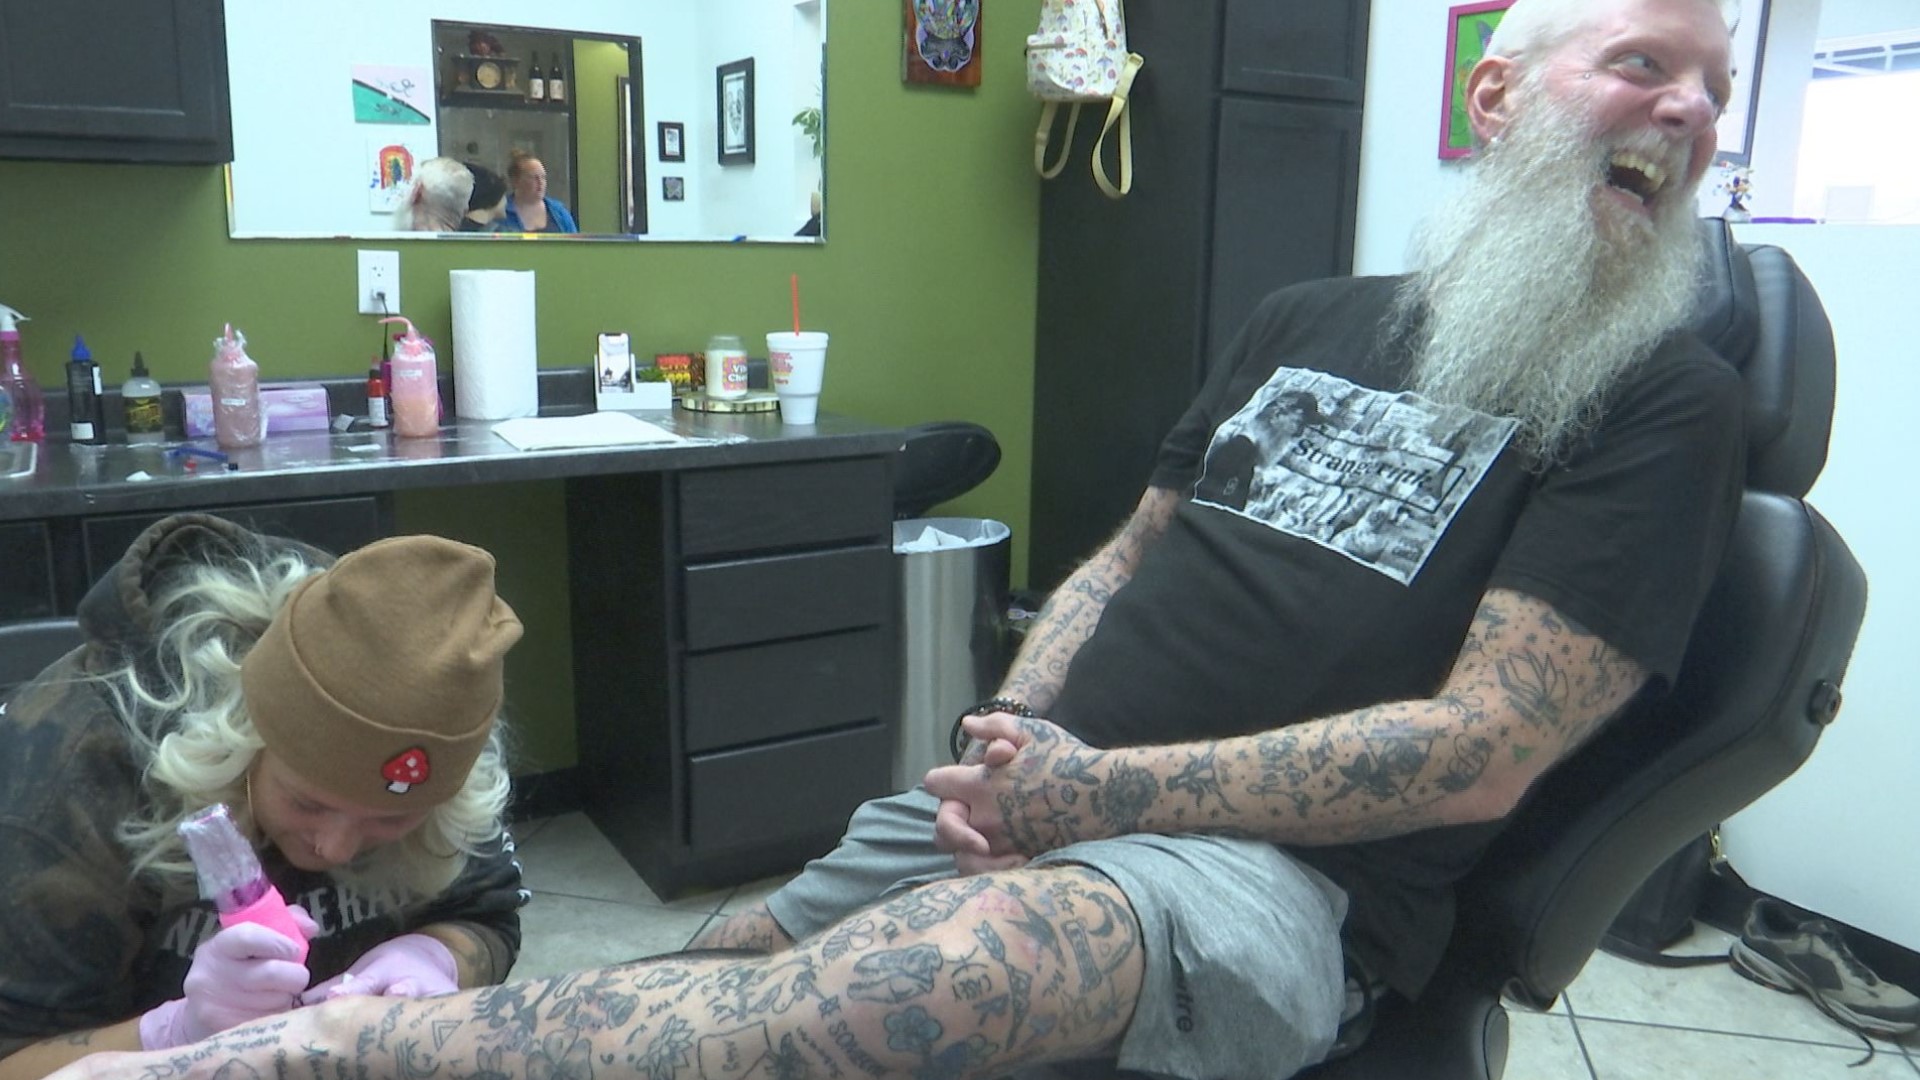 Don Caskey shares tattoos with strangers as he battles cancer 